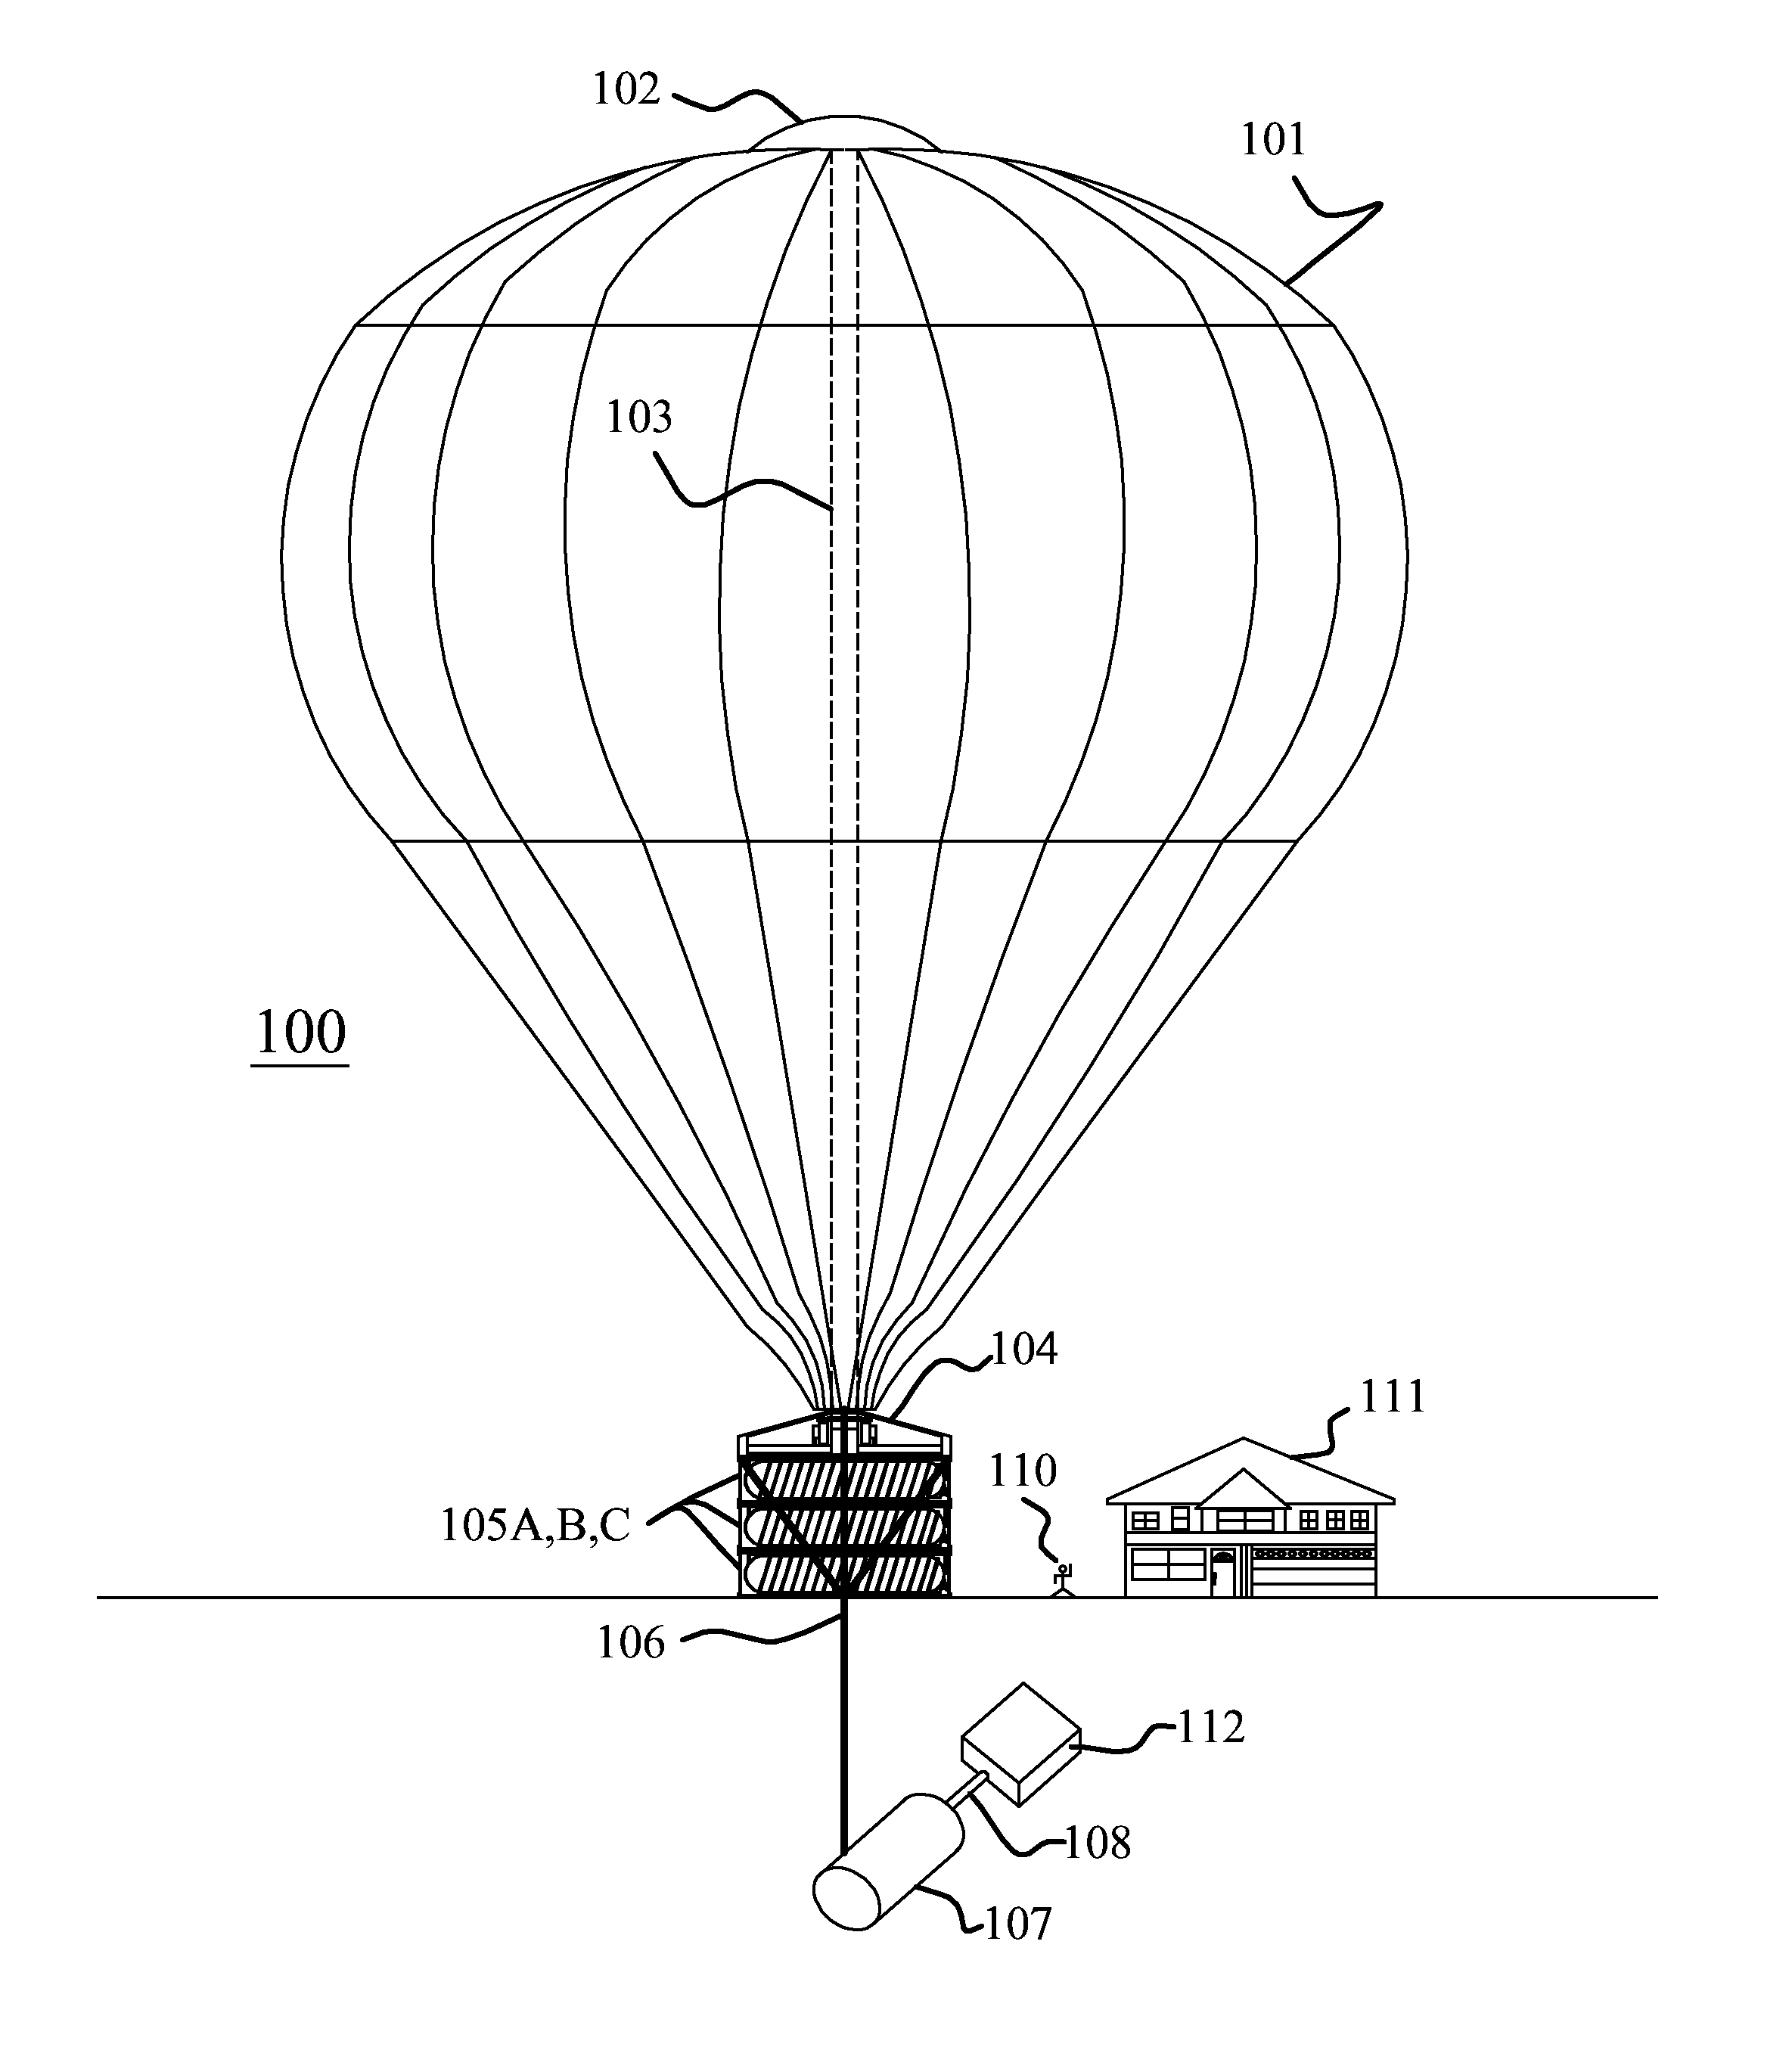 Atmospheric lapse rate cooling system